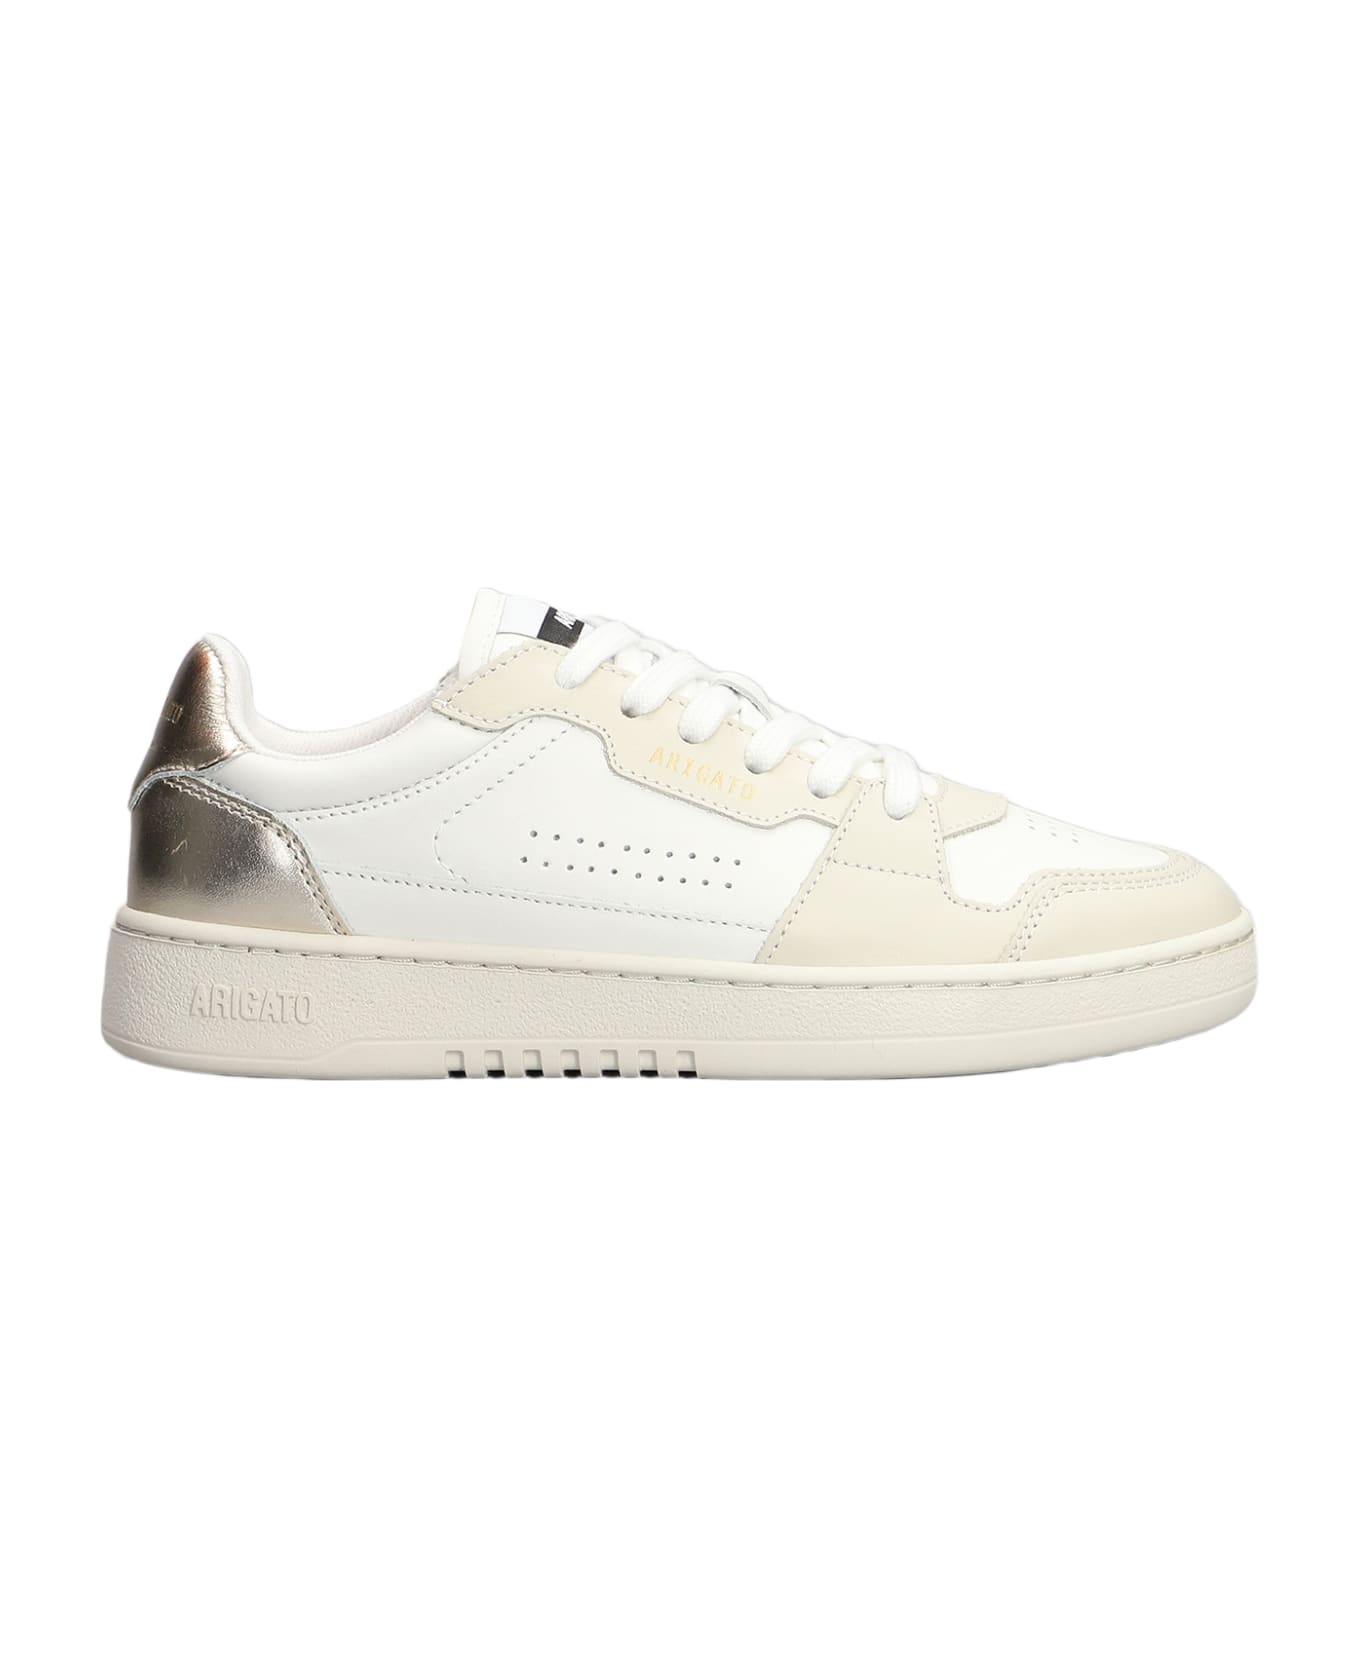 Axel Arigato Dice Lo Sneaker Sneakers In White Suede And Leather - white